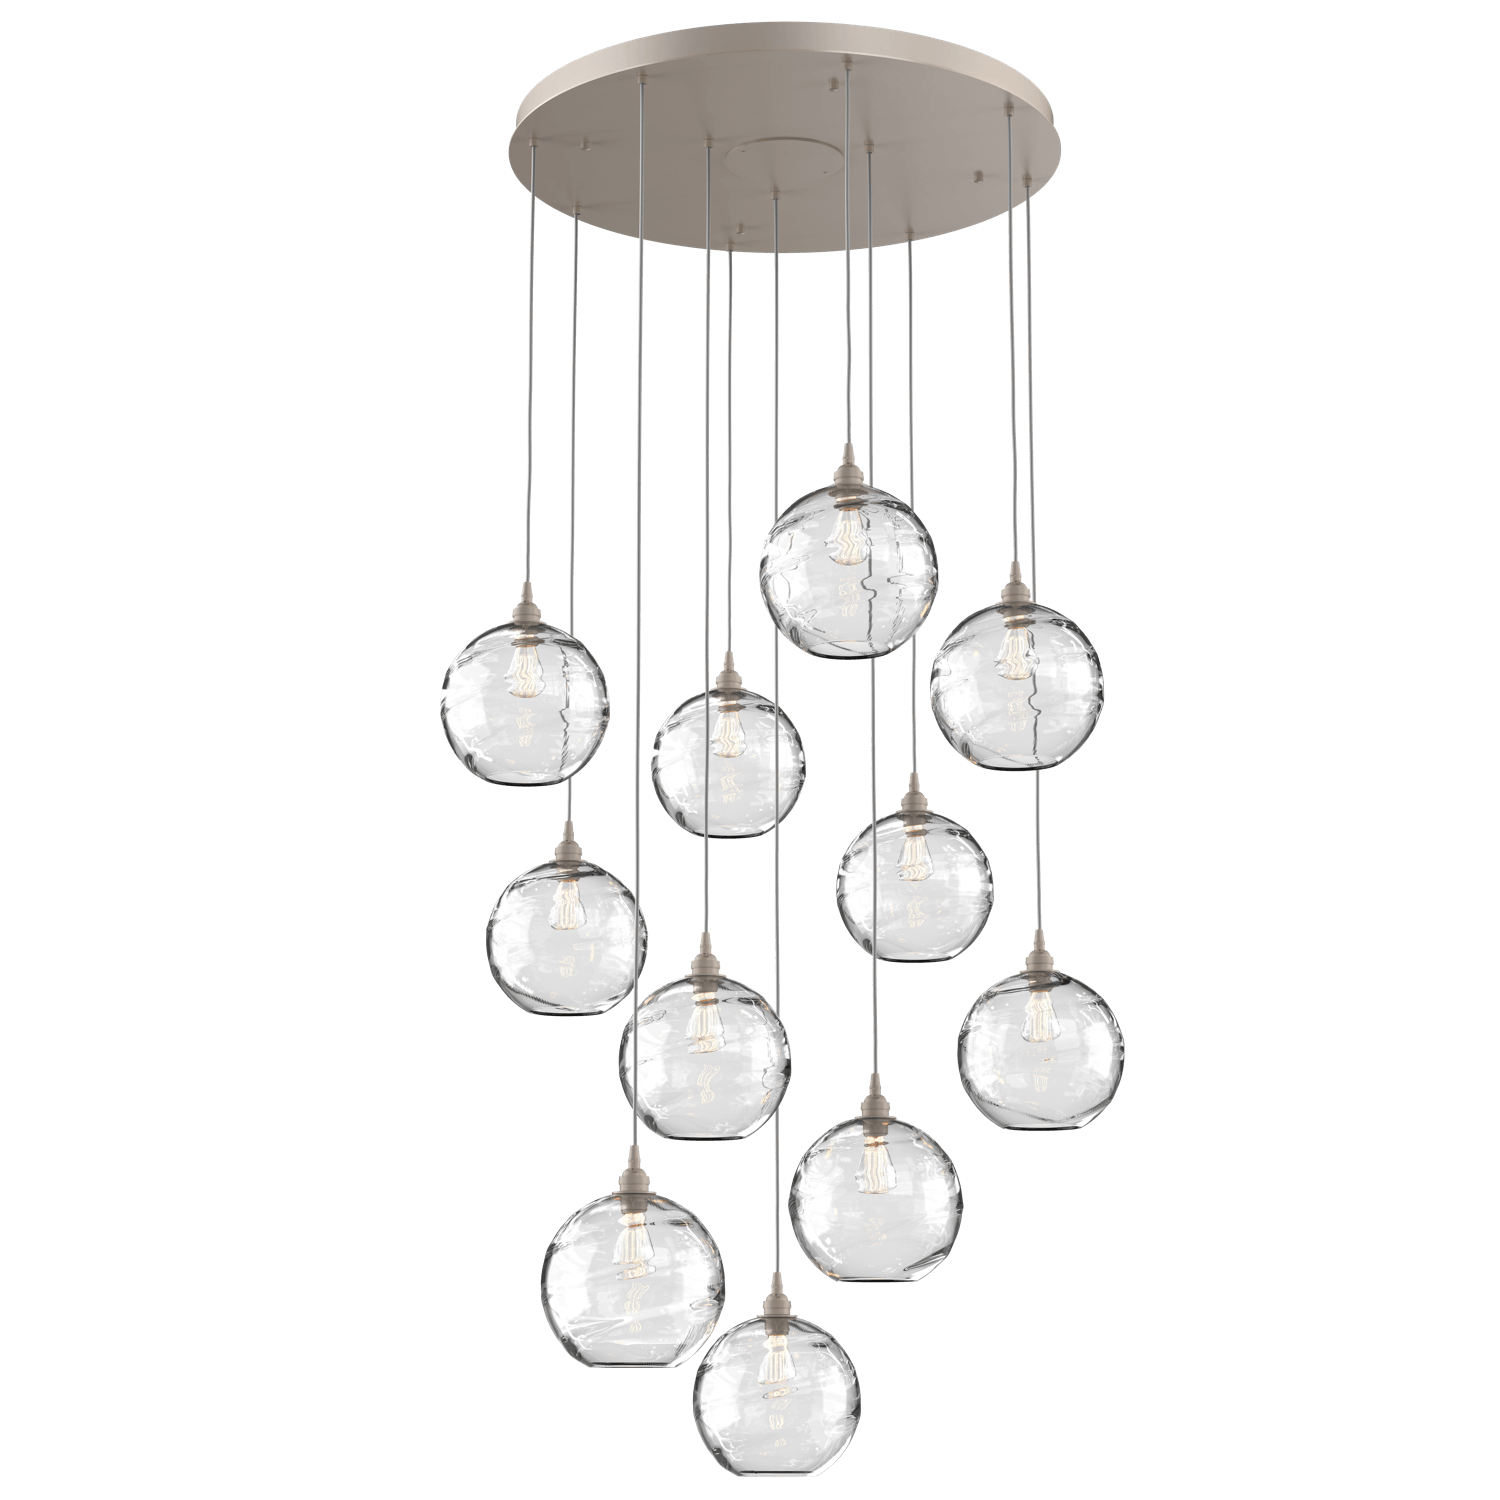 CHB0047-11-BS-OC-Hammerton-Studio-Optic-Blown-Glass-Terra-11-light-round-pendant-chandelier-with-metallic-beige-silver-finish-and-optic-clear-blown-glass-shades-and-incandescent-lamping